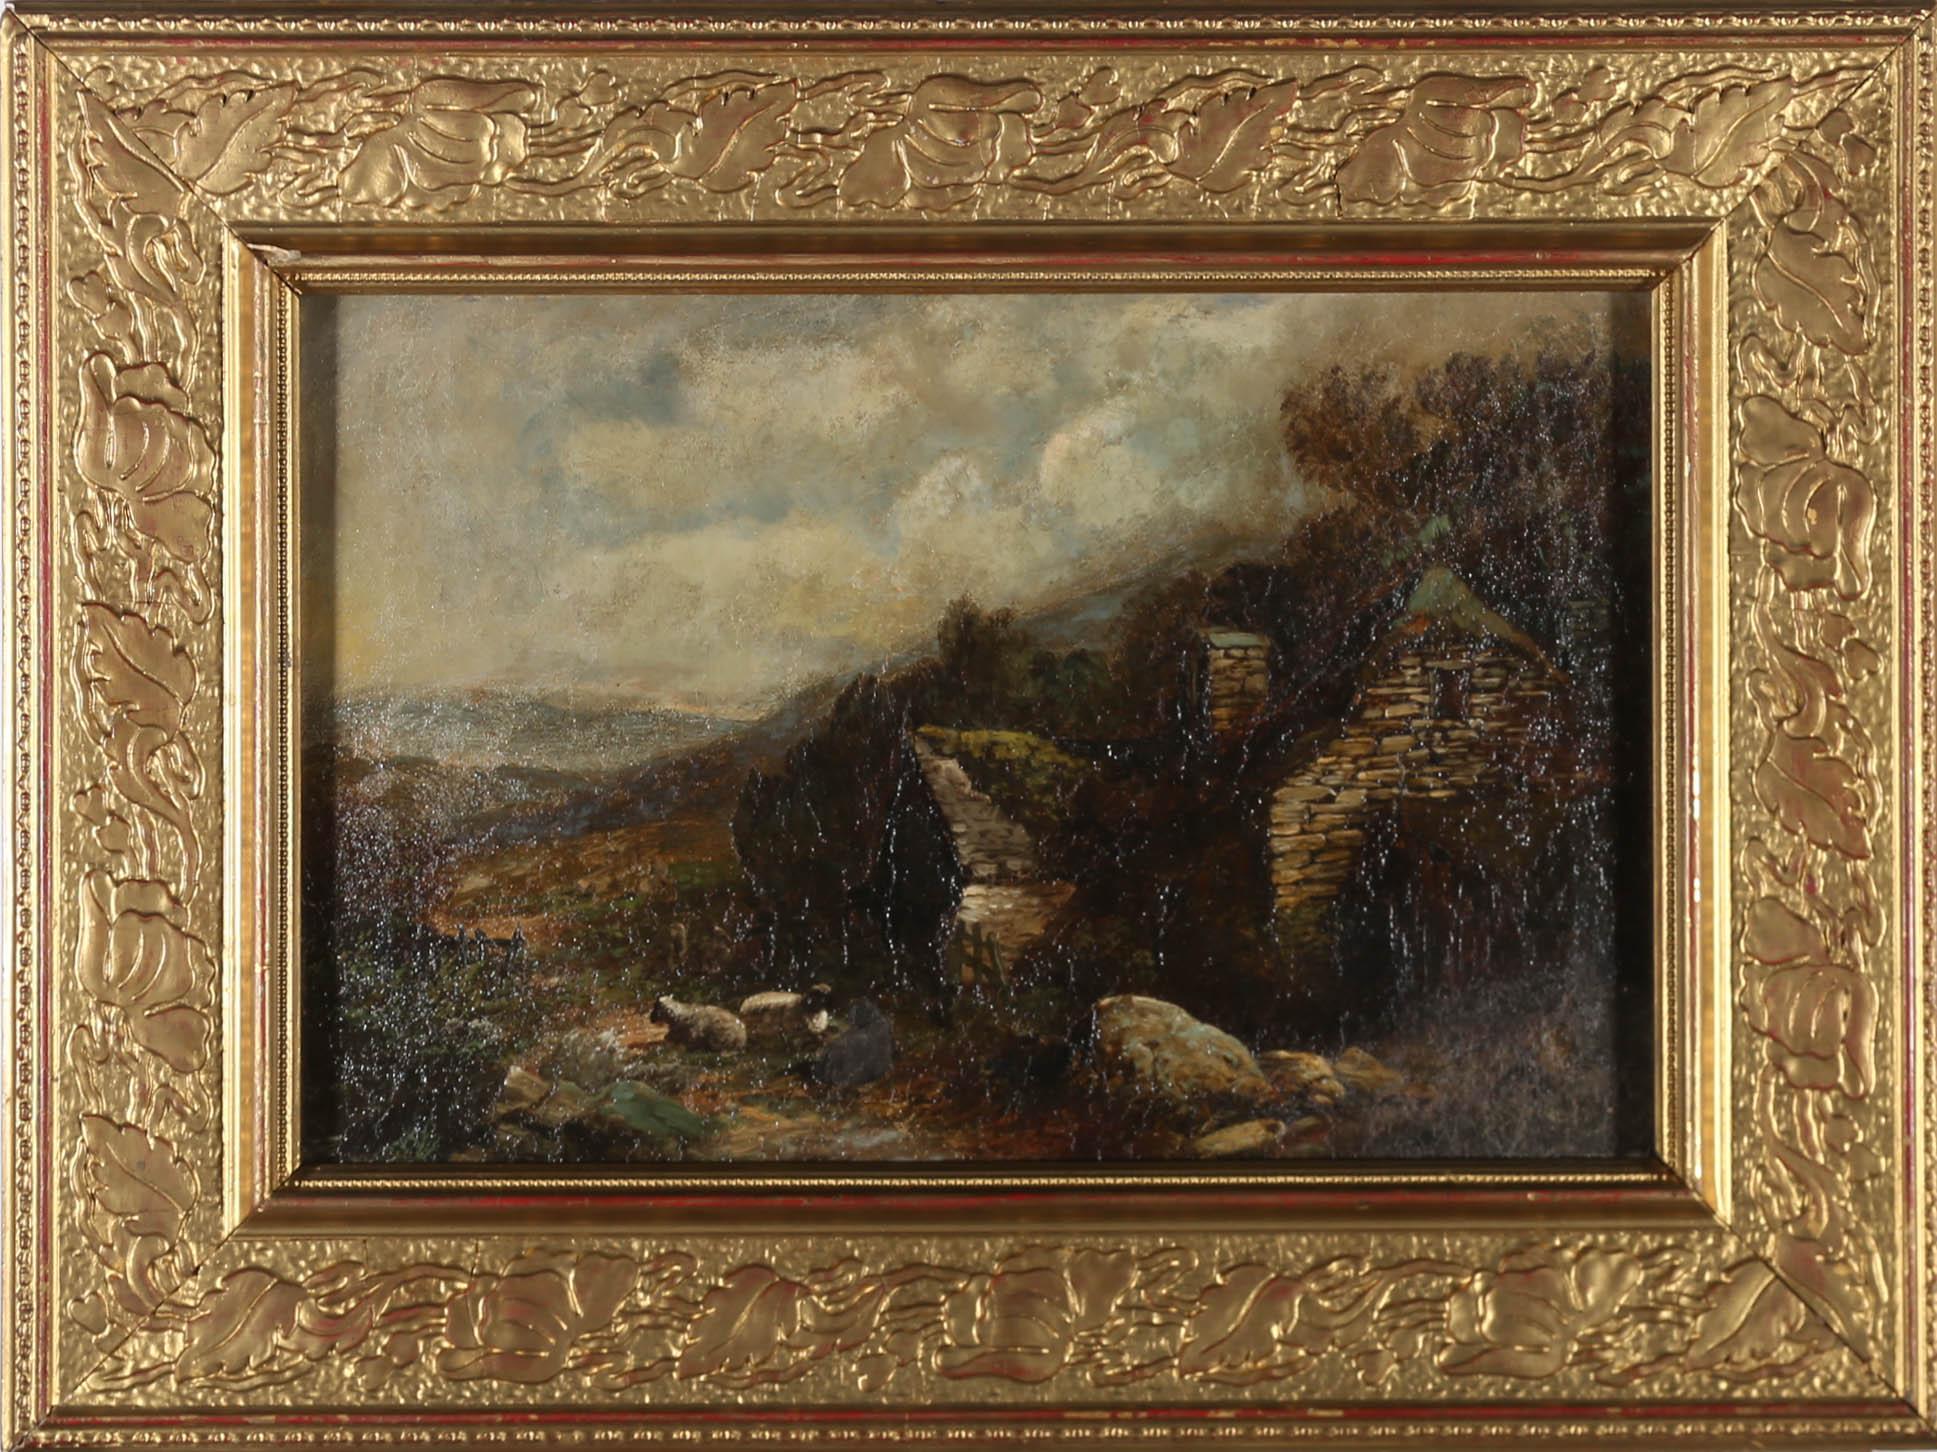 Unknown Landscape Painting - Framed 19th Century Oil - A Welsh Farm